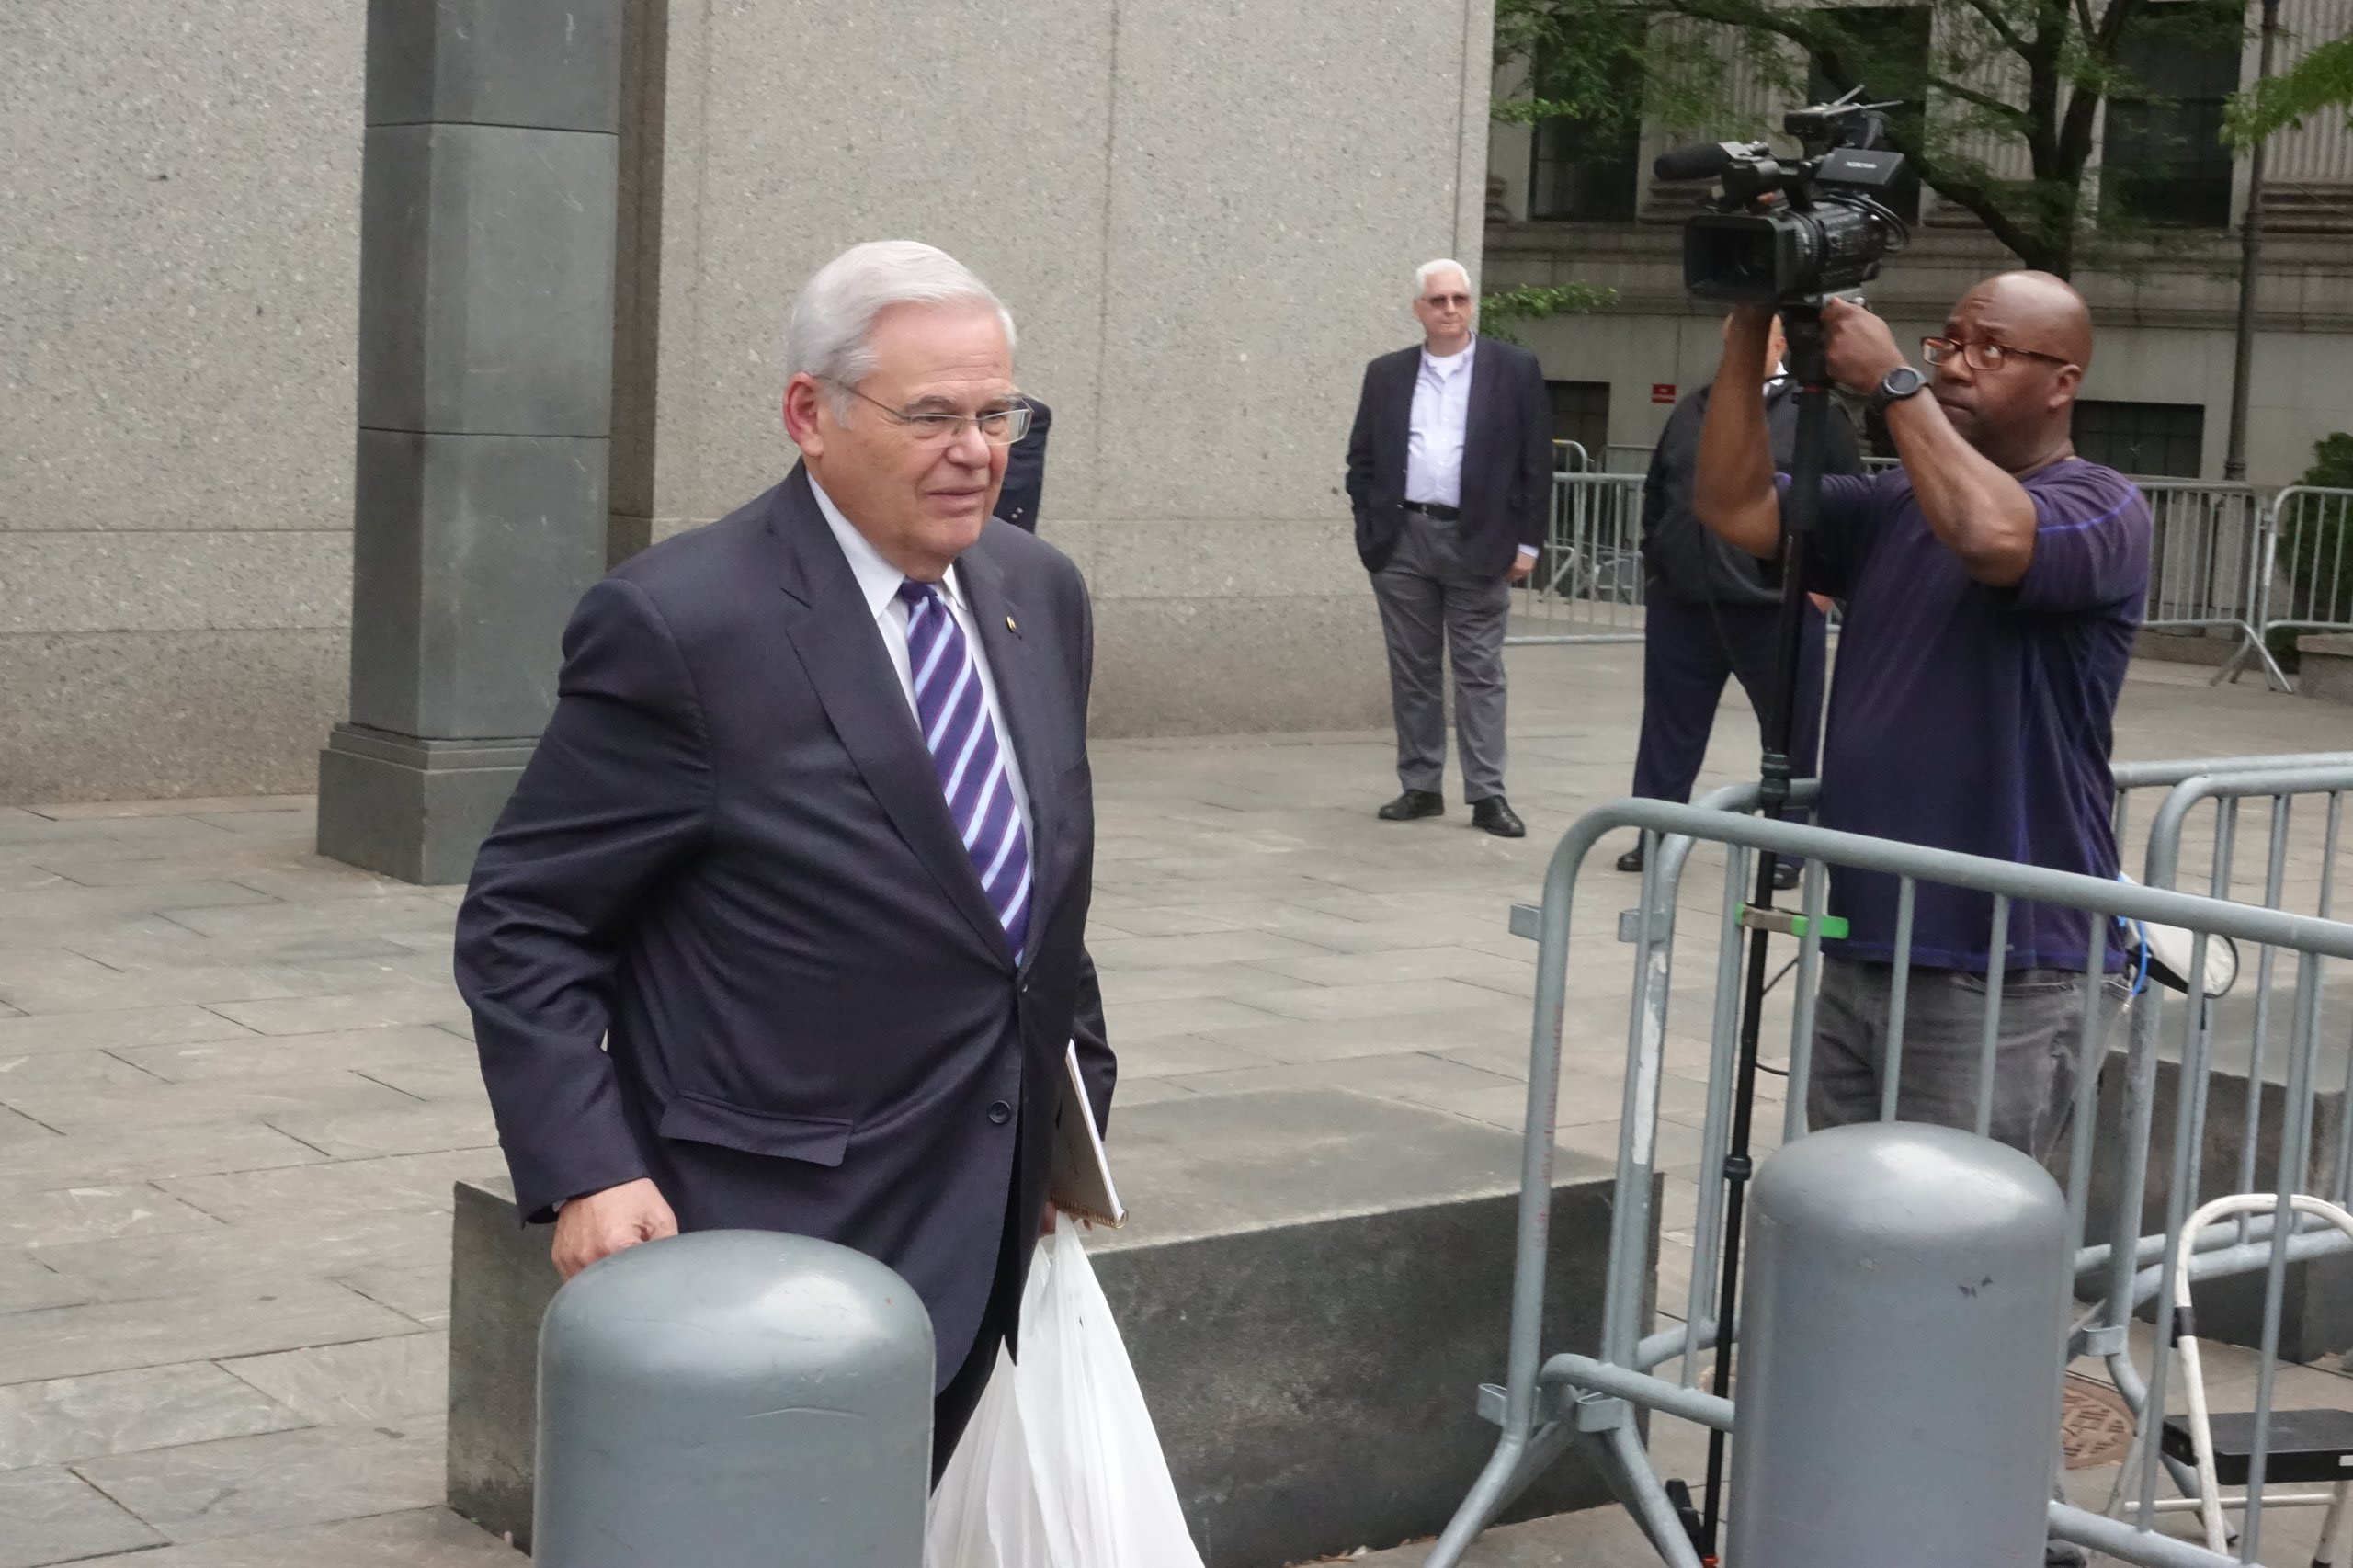 Feds lay out timeline of Egyptian bribery conspiracy in Menendez corruption trial